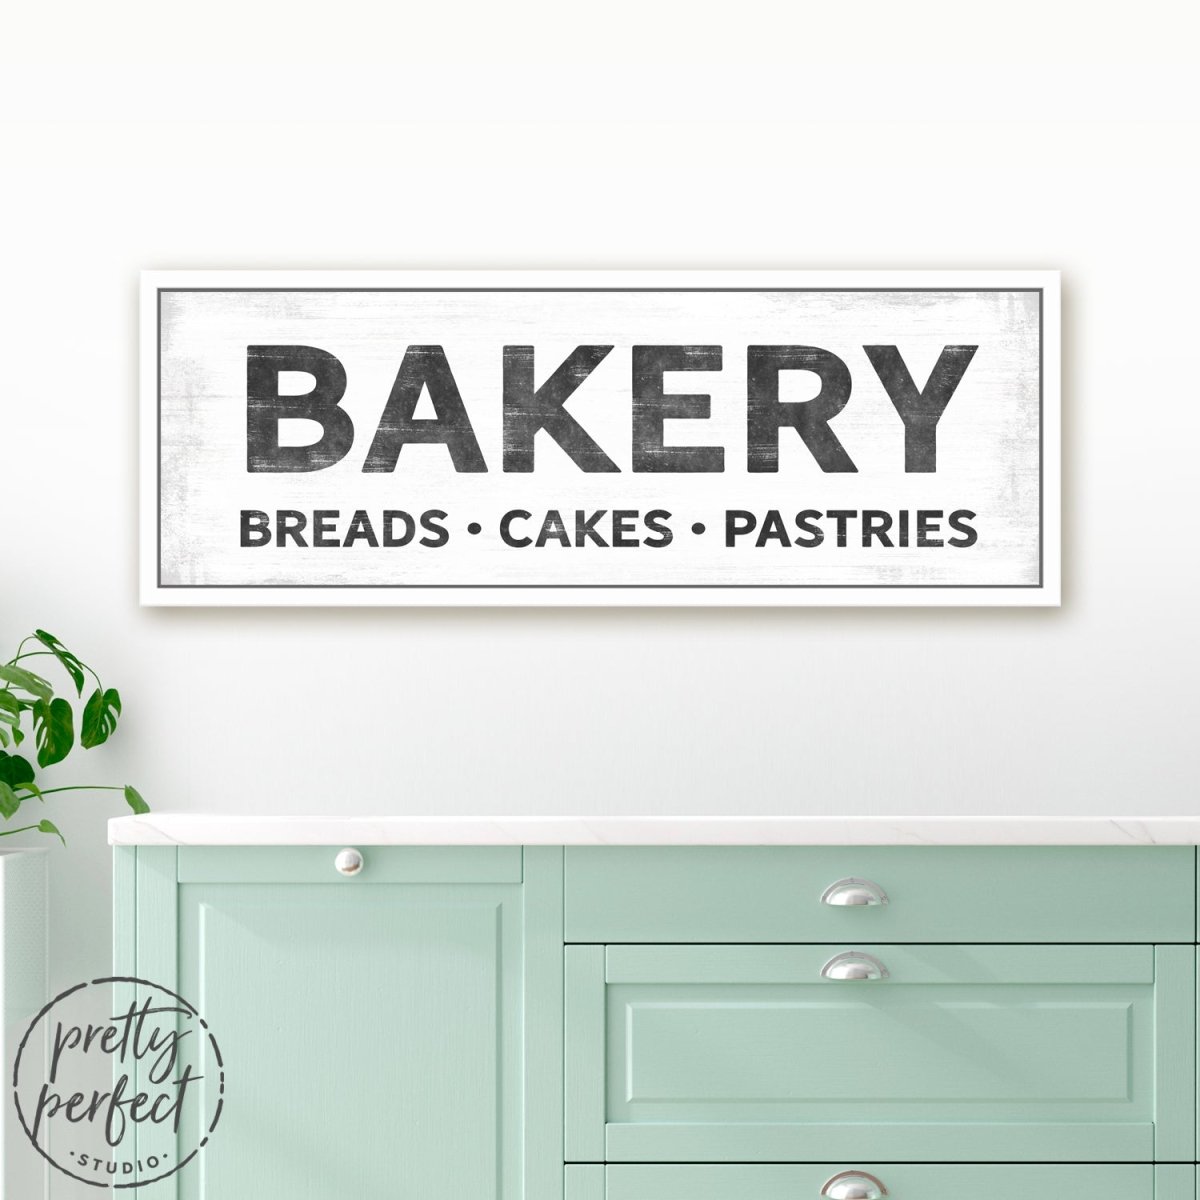 Bakery, Breads, Cakes, Pastries Kitchen Sign Above Table - Pretty Perfect Studio